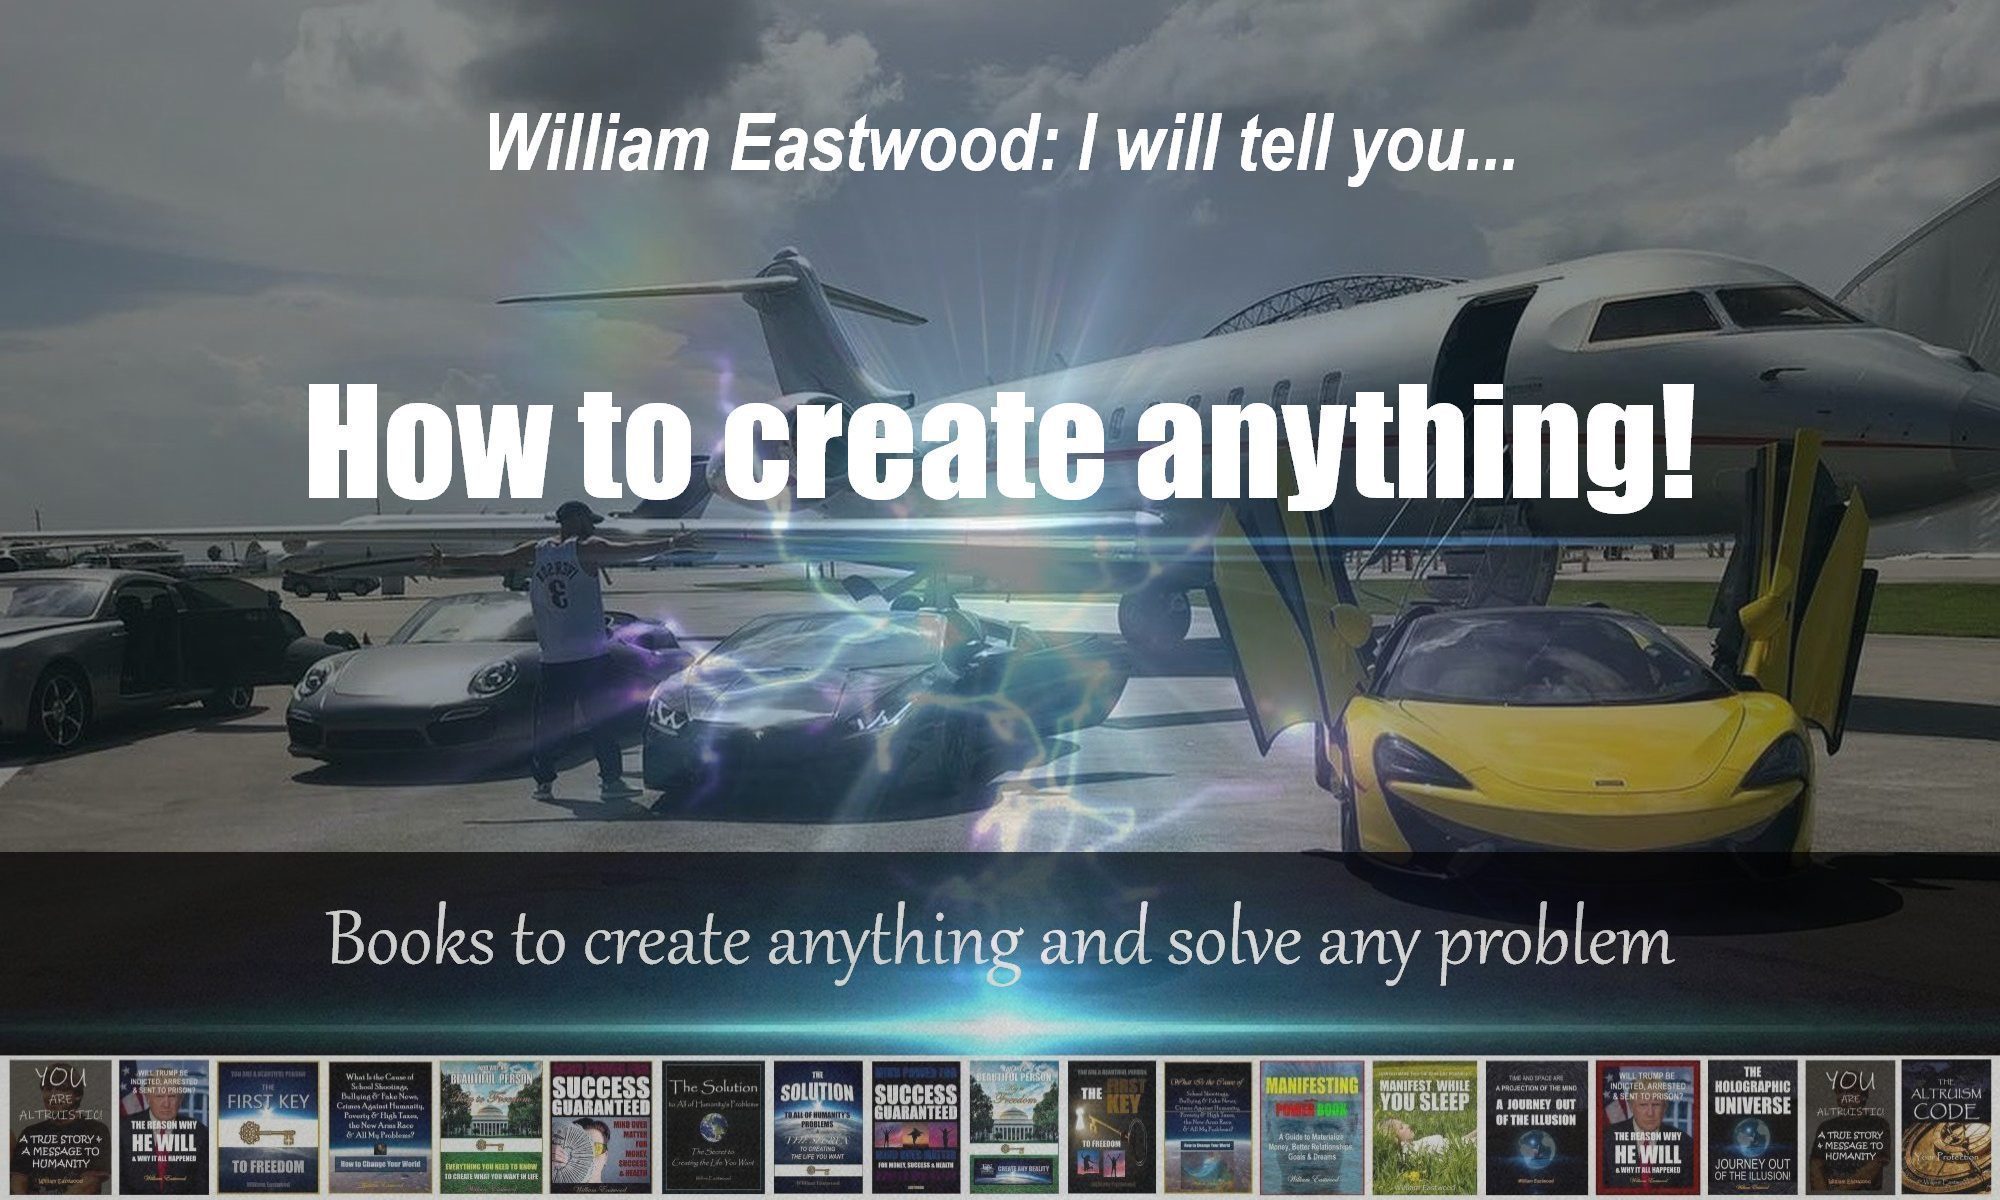 Manifesting Books on How to Attract Create Money Fast: eBooks, Audiobooks Online Bookstore